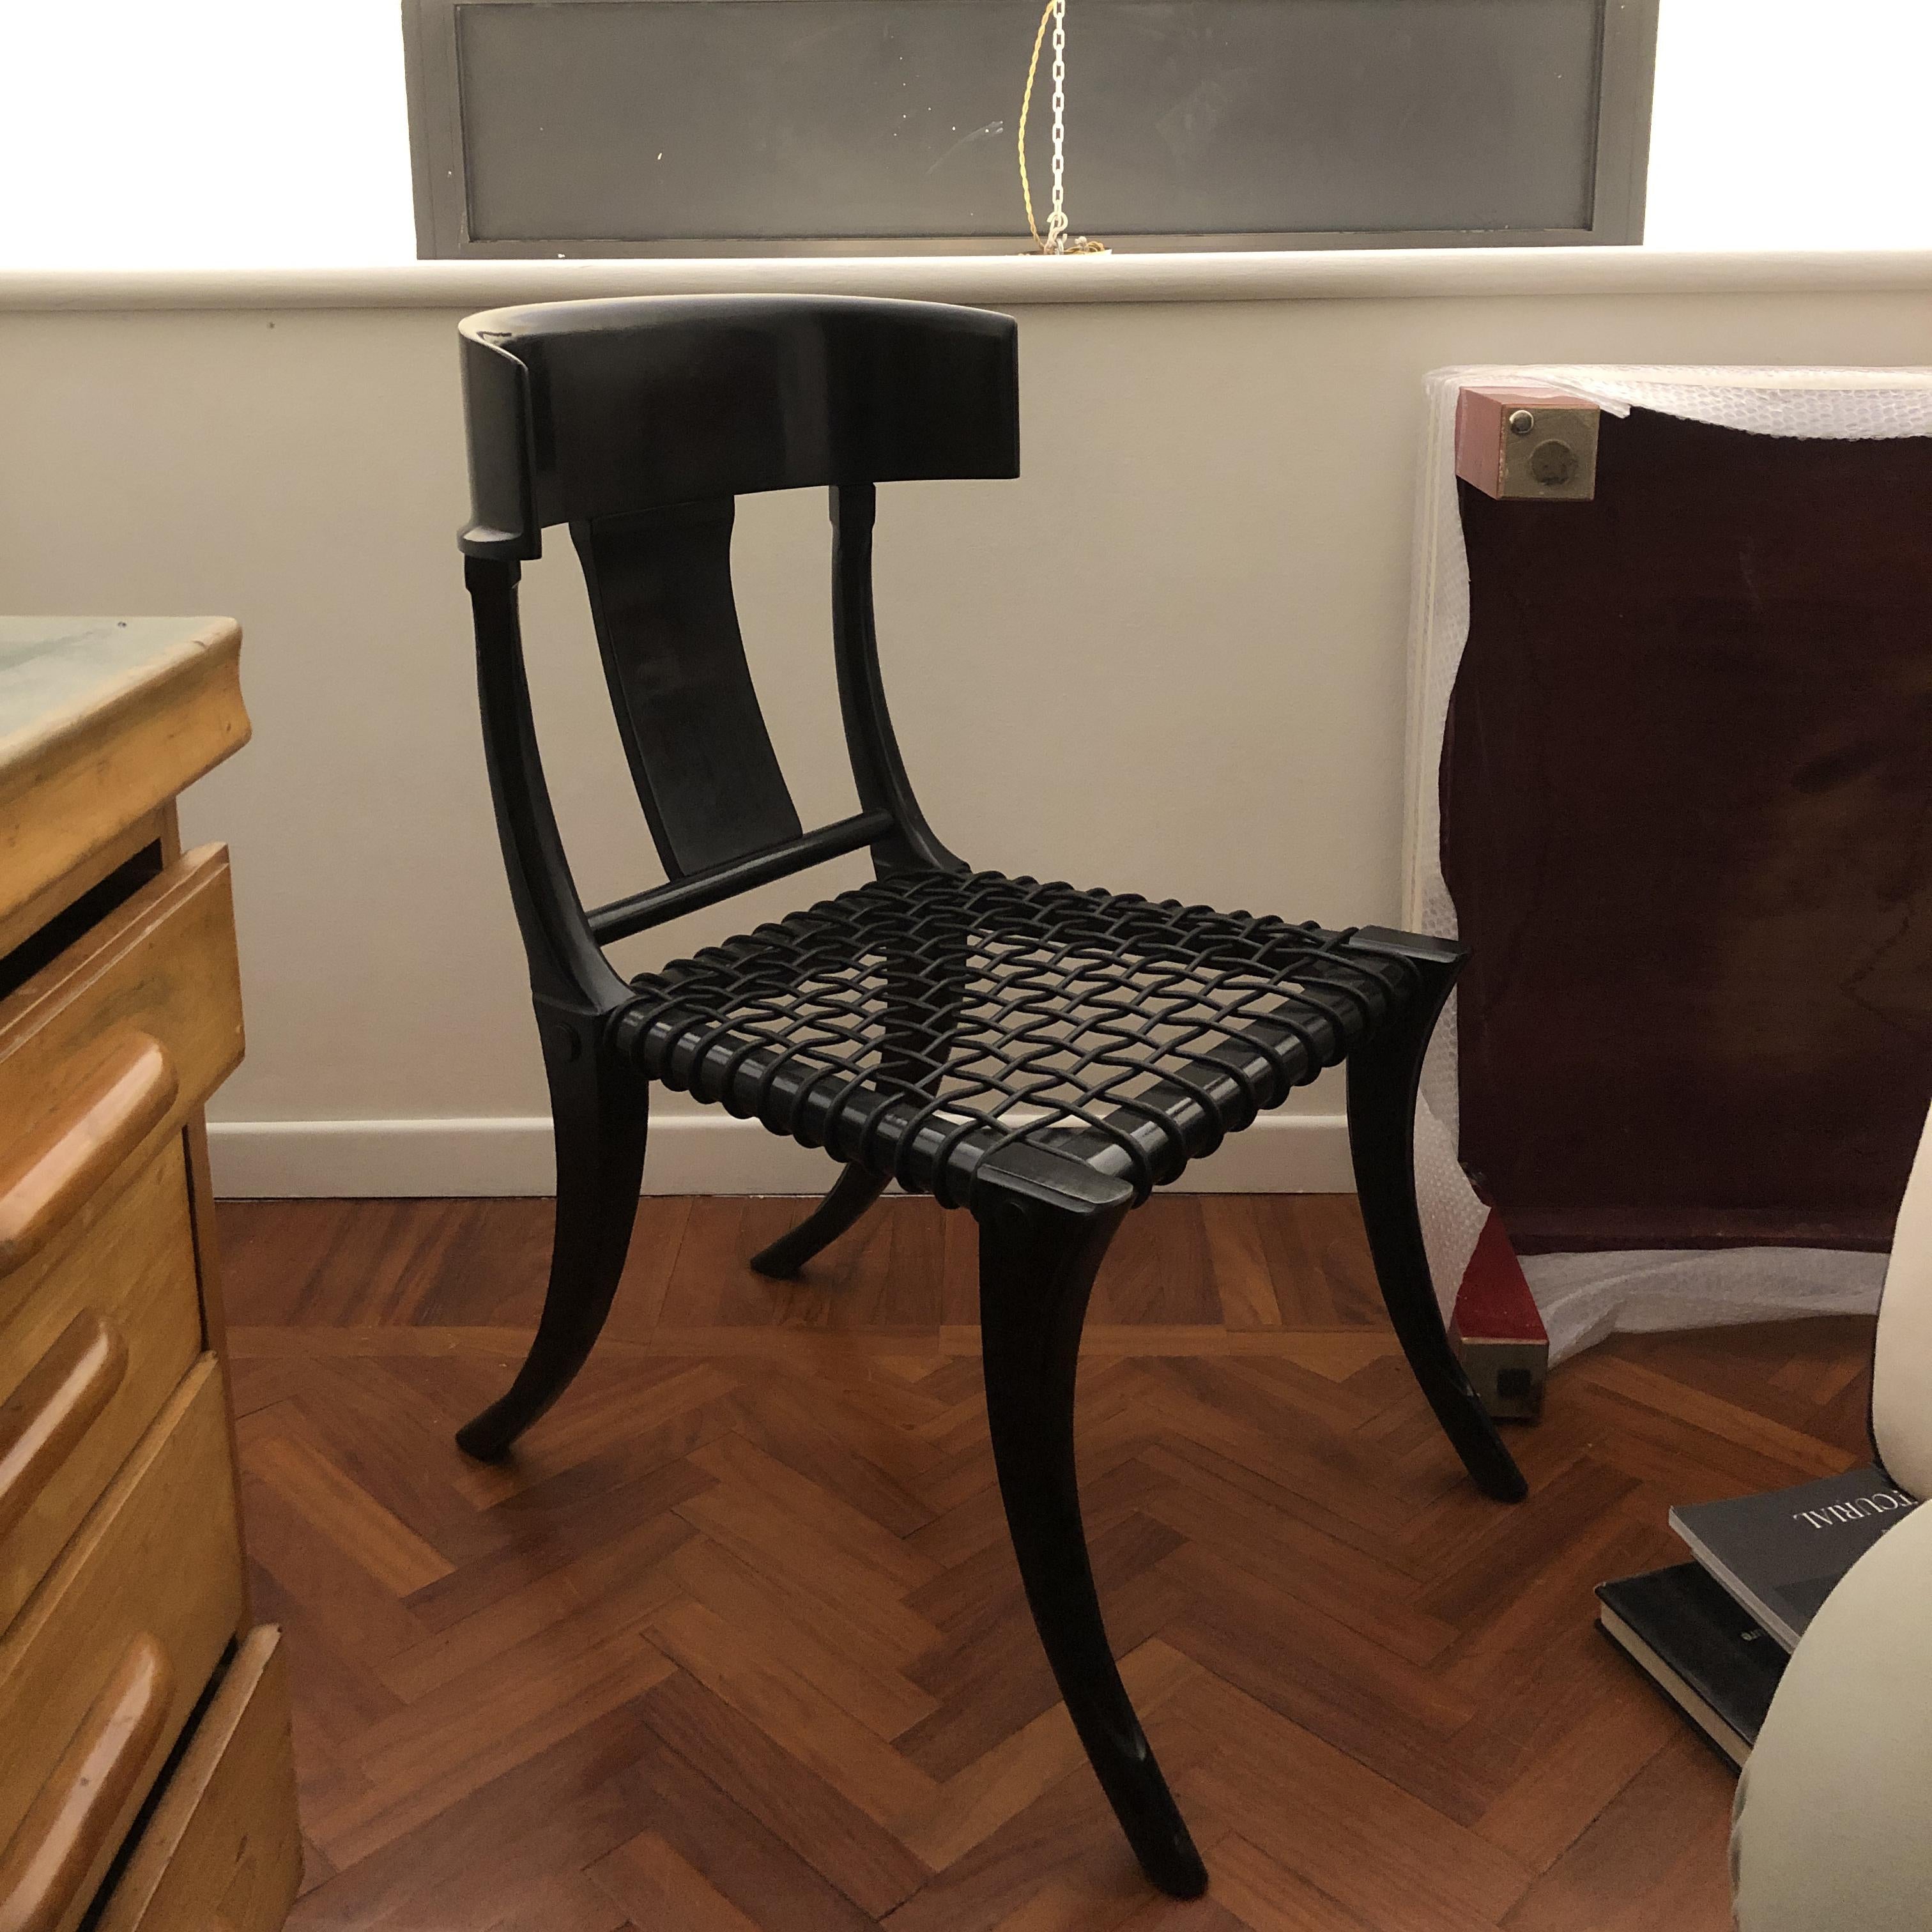 Klismos customizable dining chairs with saber legs, black lacquered wood and black woven leather seats. Available in other colors and upholstery.

Klismos are walnut wood chairs with deep and large seat and back wraparound feeling backrest. These